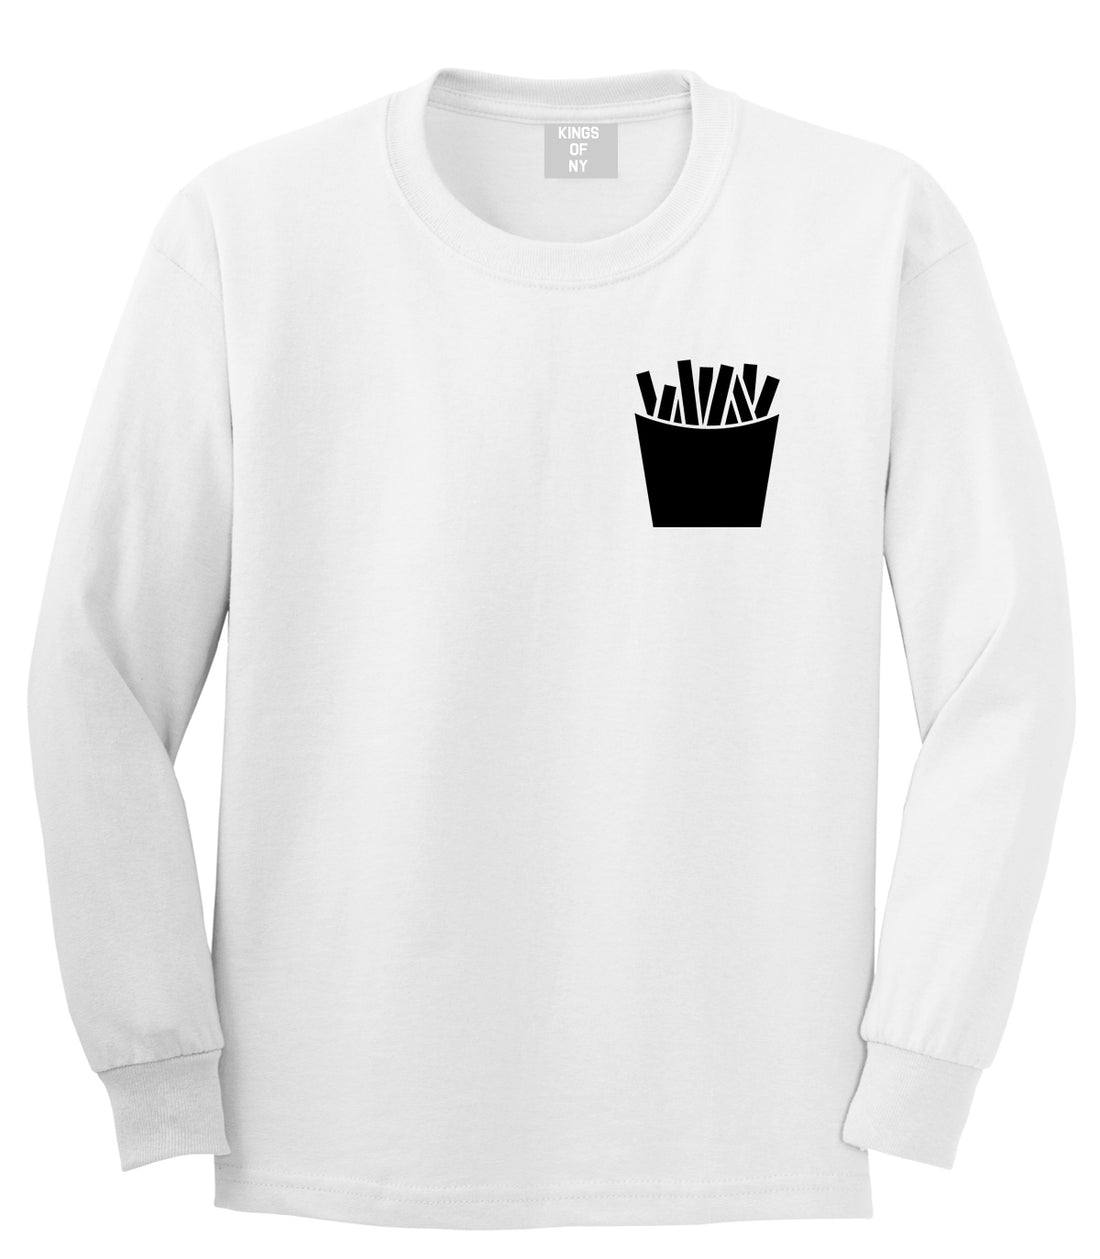 French Fry Fries Chest Mens White Long Sleeve T-Shirt by KINGS OF NY